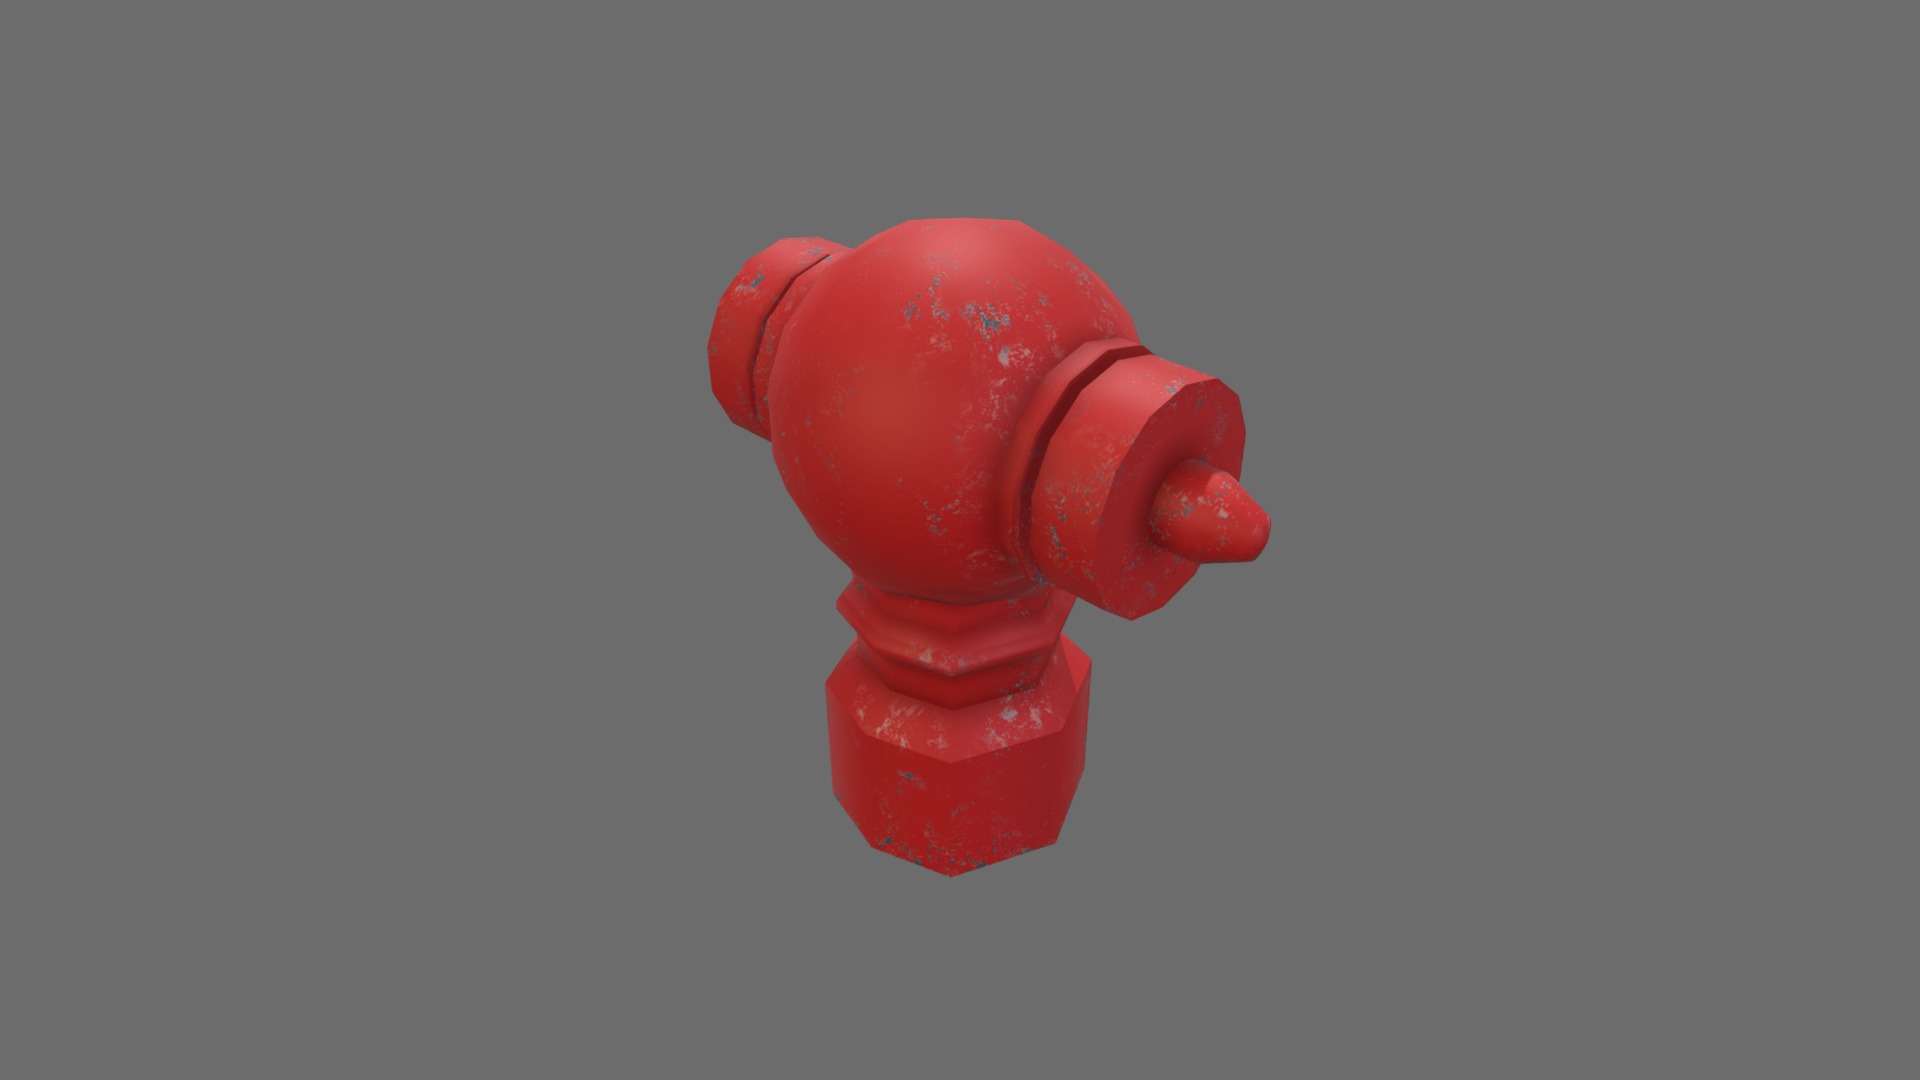 3D model Fire Hydrant - This is a 3D model of the Fire Hydrant. The 3D model is about a red toy on a white surface.